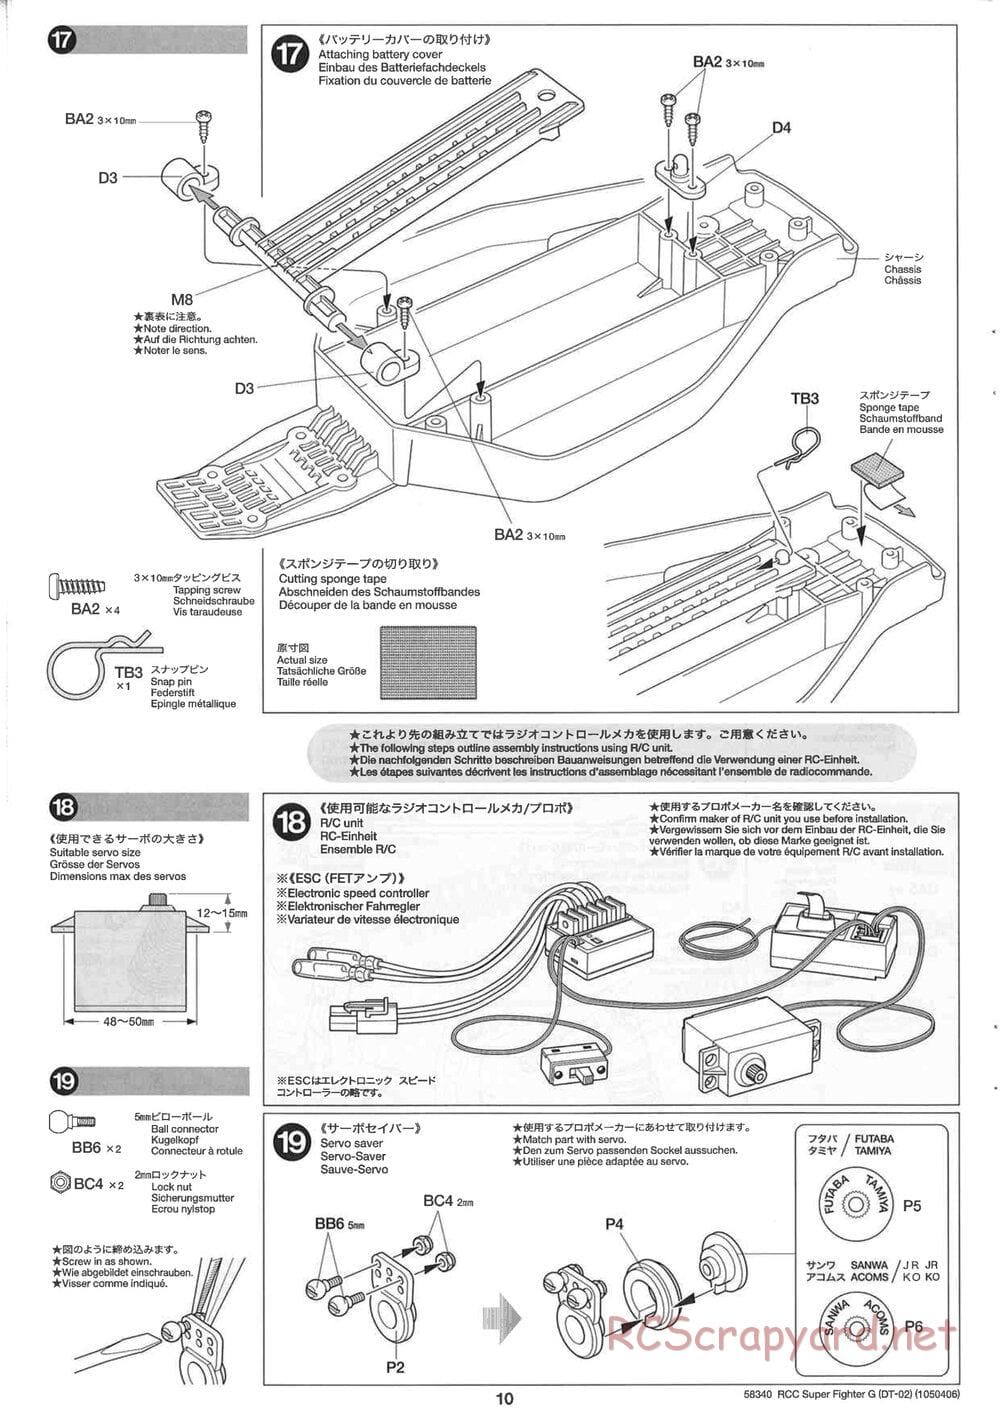 Tamiya - Super Fighter G Chassis - Manual - Page 10